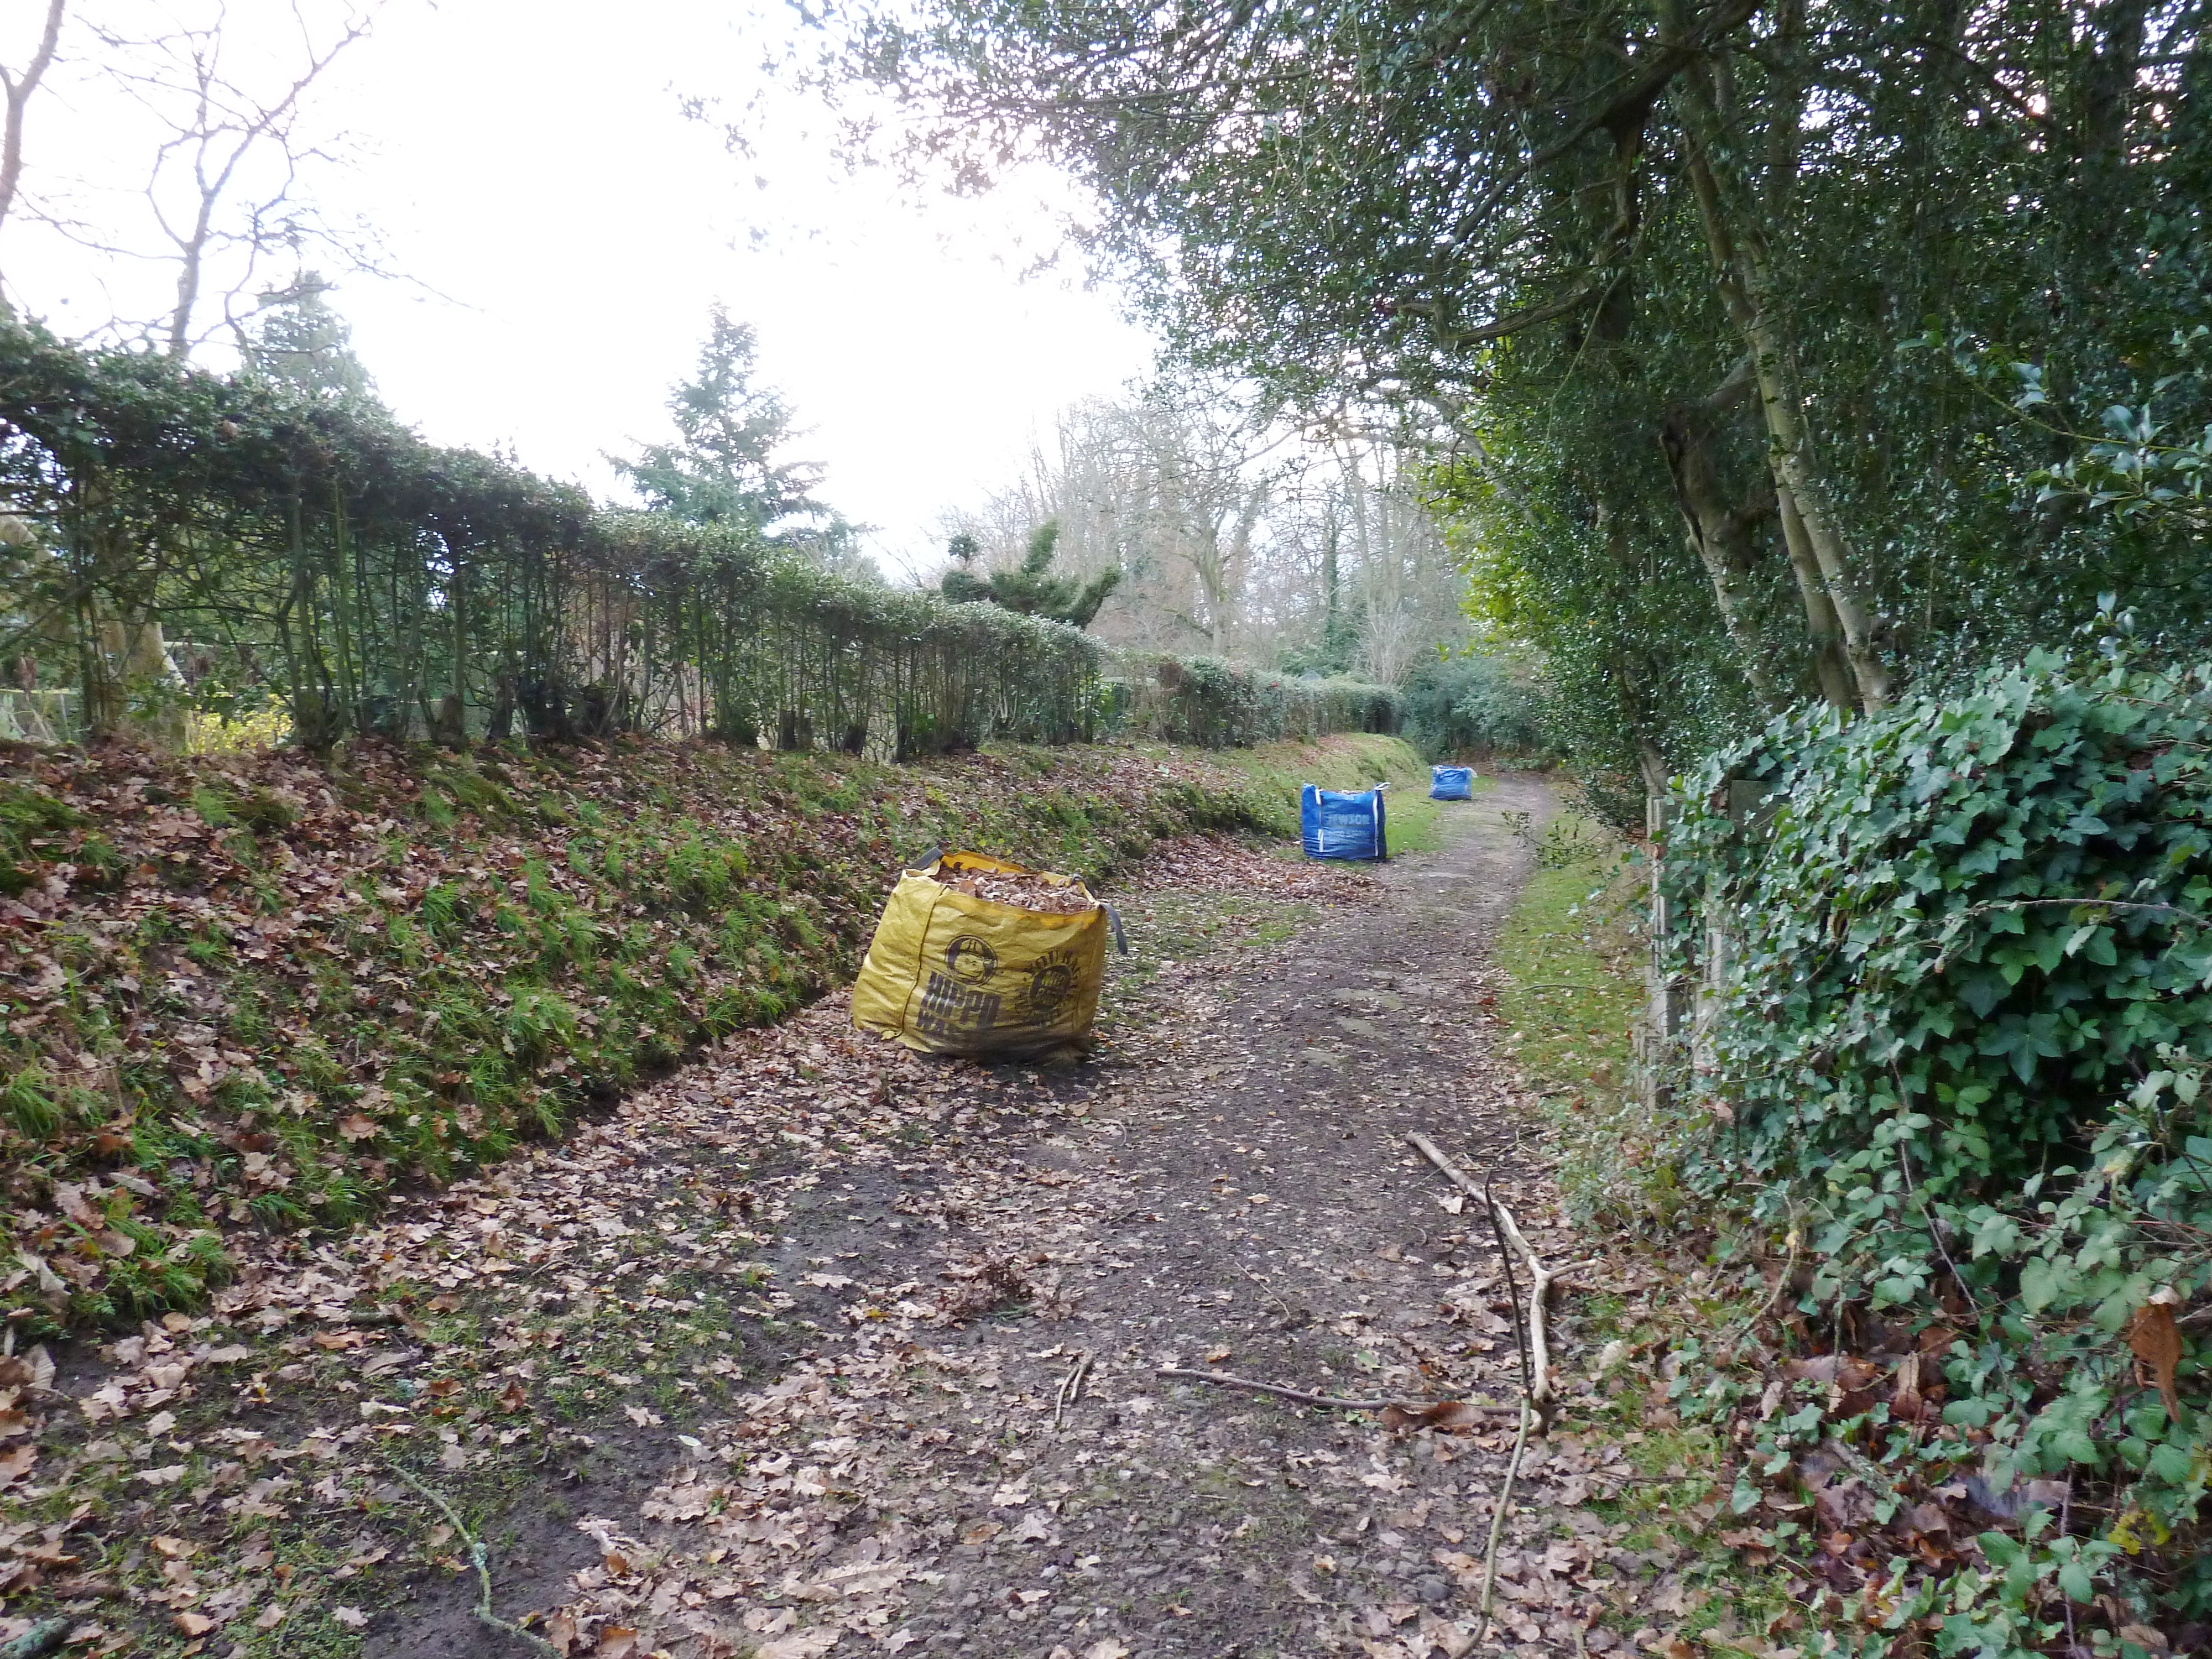 Bags of leaves on footpath 140 by Fintry - geograph.org.uk - 2739957